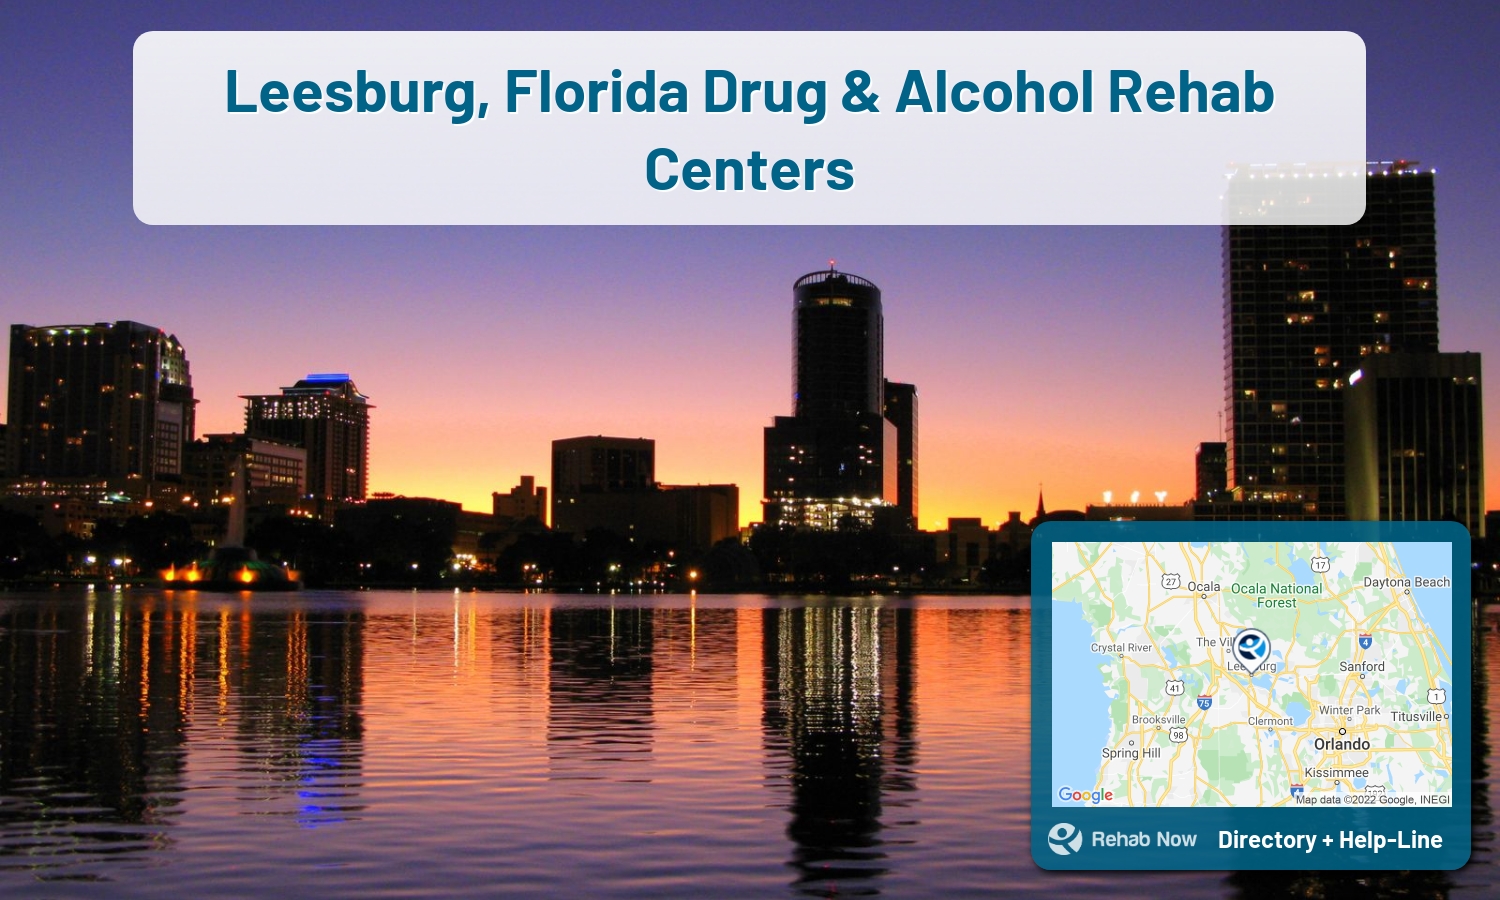 Our experts can help you find treatment now in Leesburg, Florida. We list drug rehab and alcohol centers in Florida.